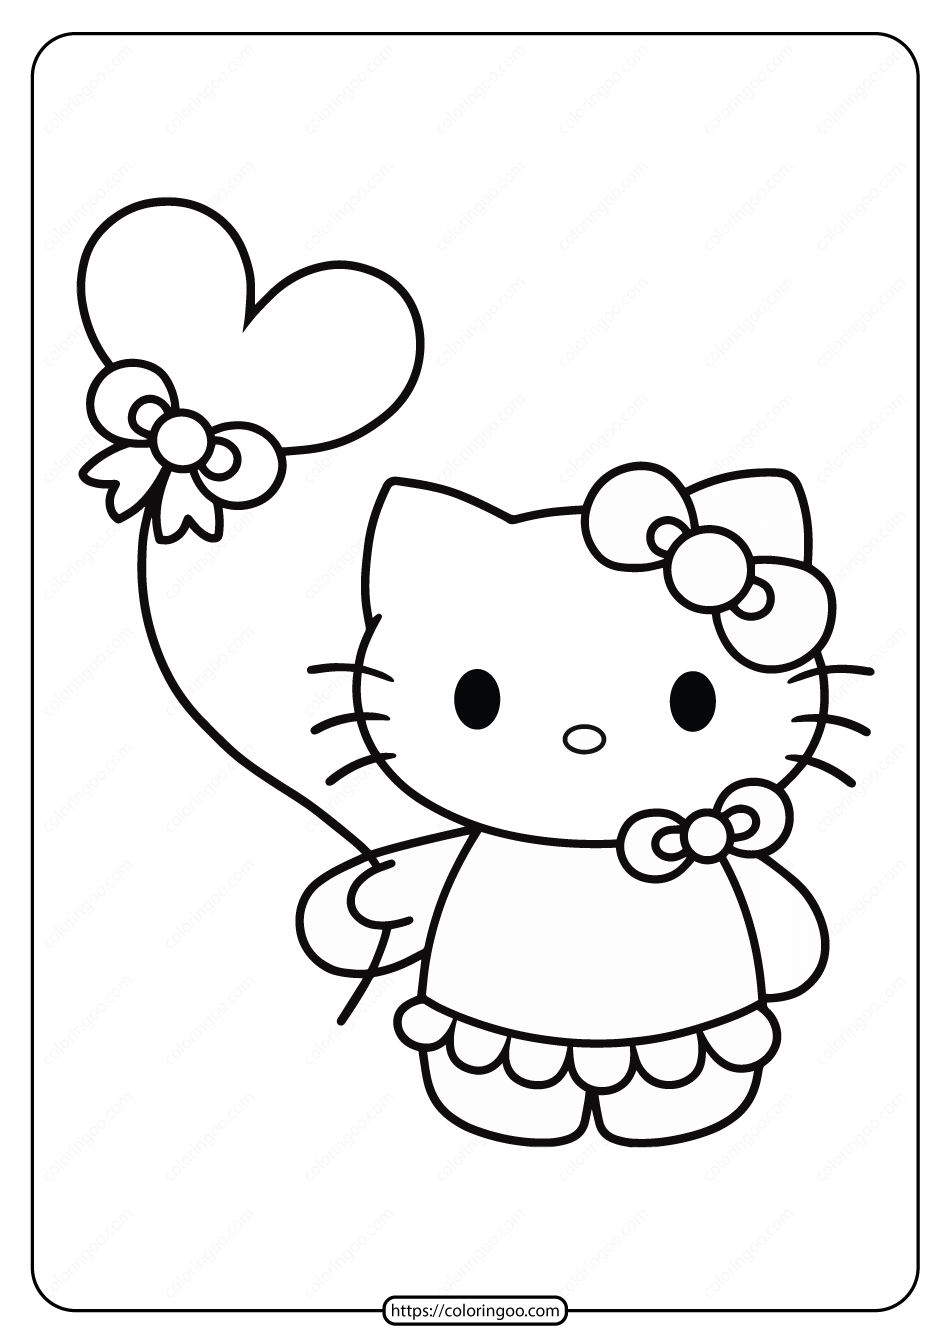 Printable Hello Kitty with Balloon Coloring Page